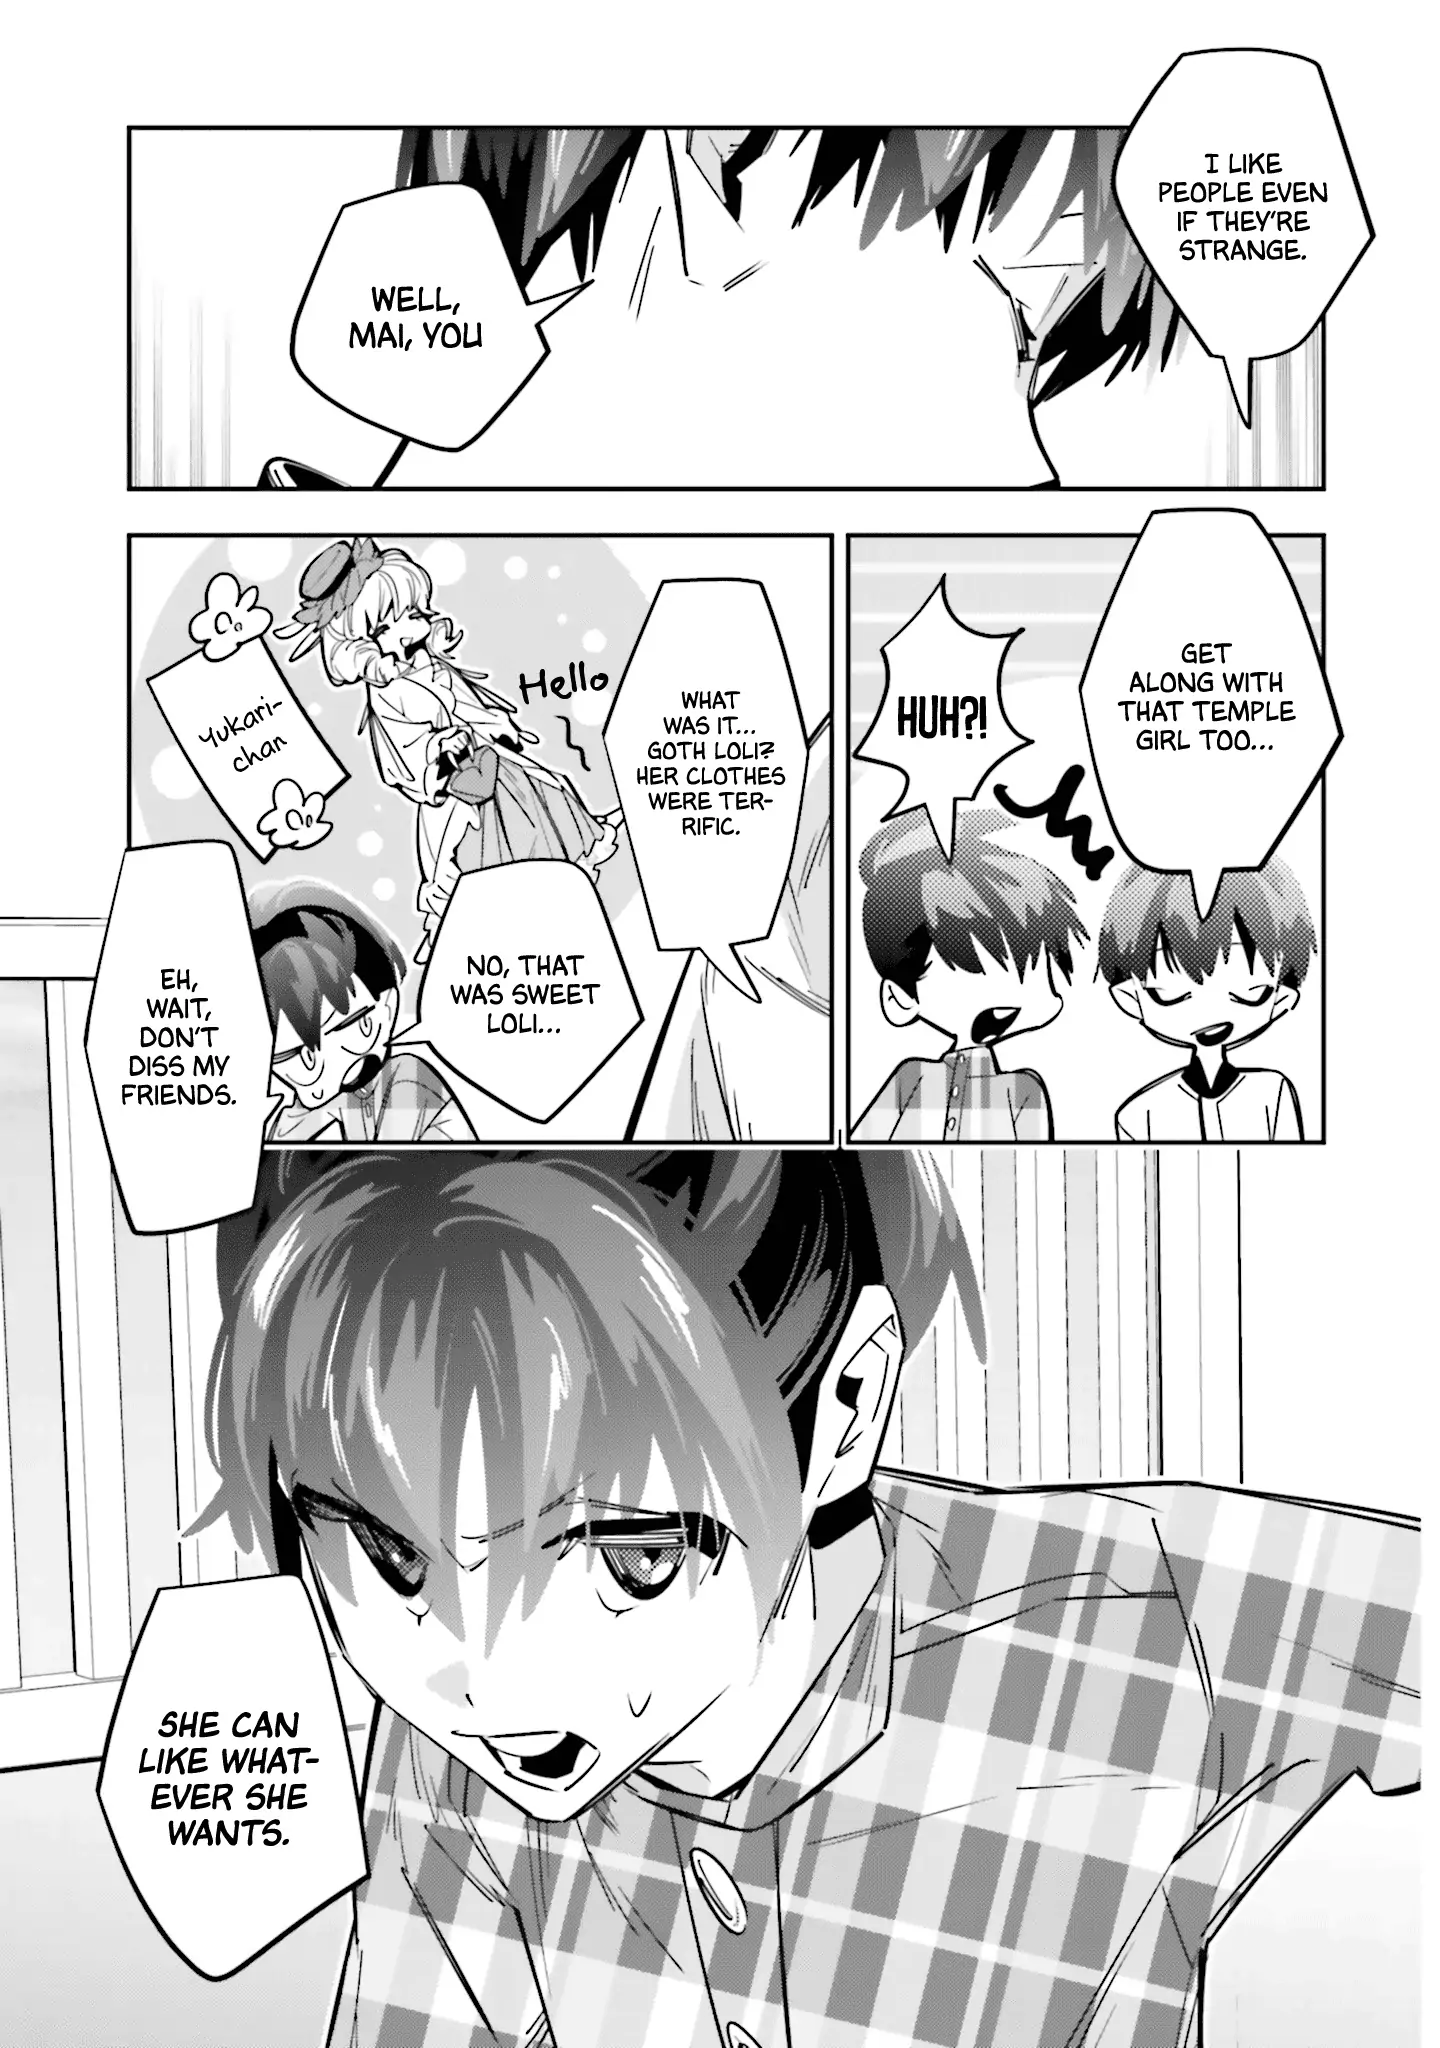 I Reincarnated As The Little Sister Of A Death Game Manga's Murder Mastermind And Failed chapter 3 - page 25